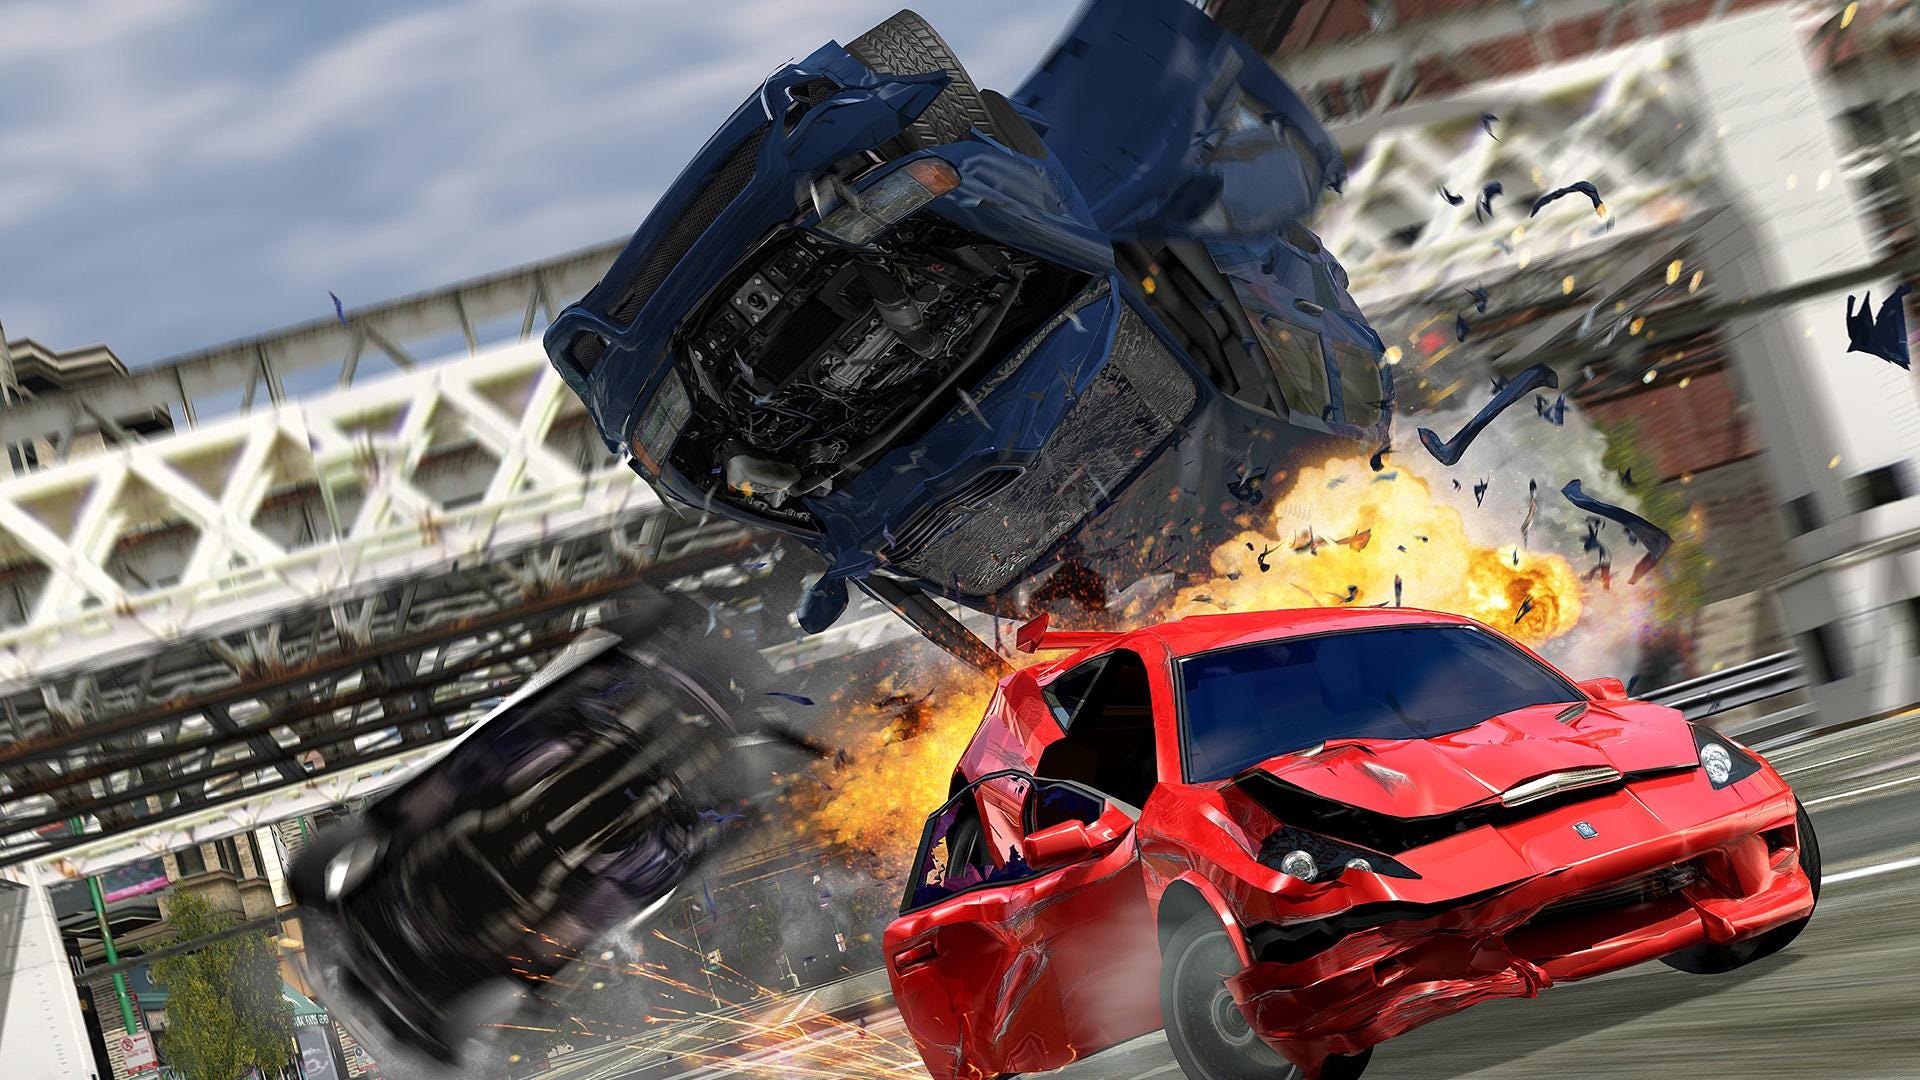  Burnout 3 Takedown - Xbox : Artist Not Provided: Video Games